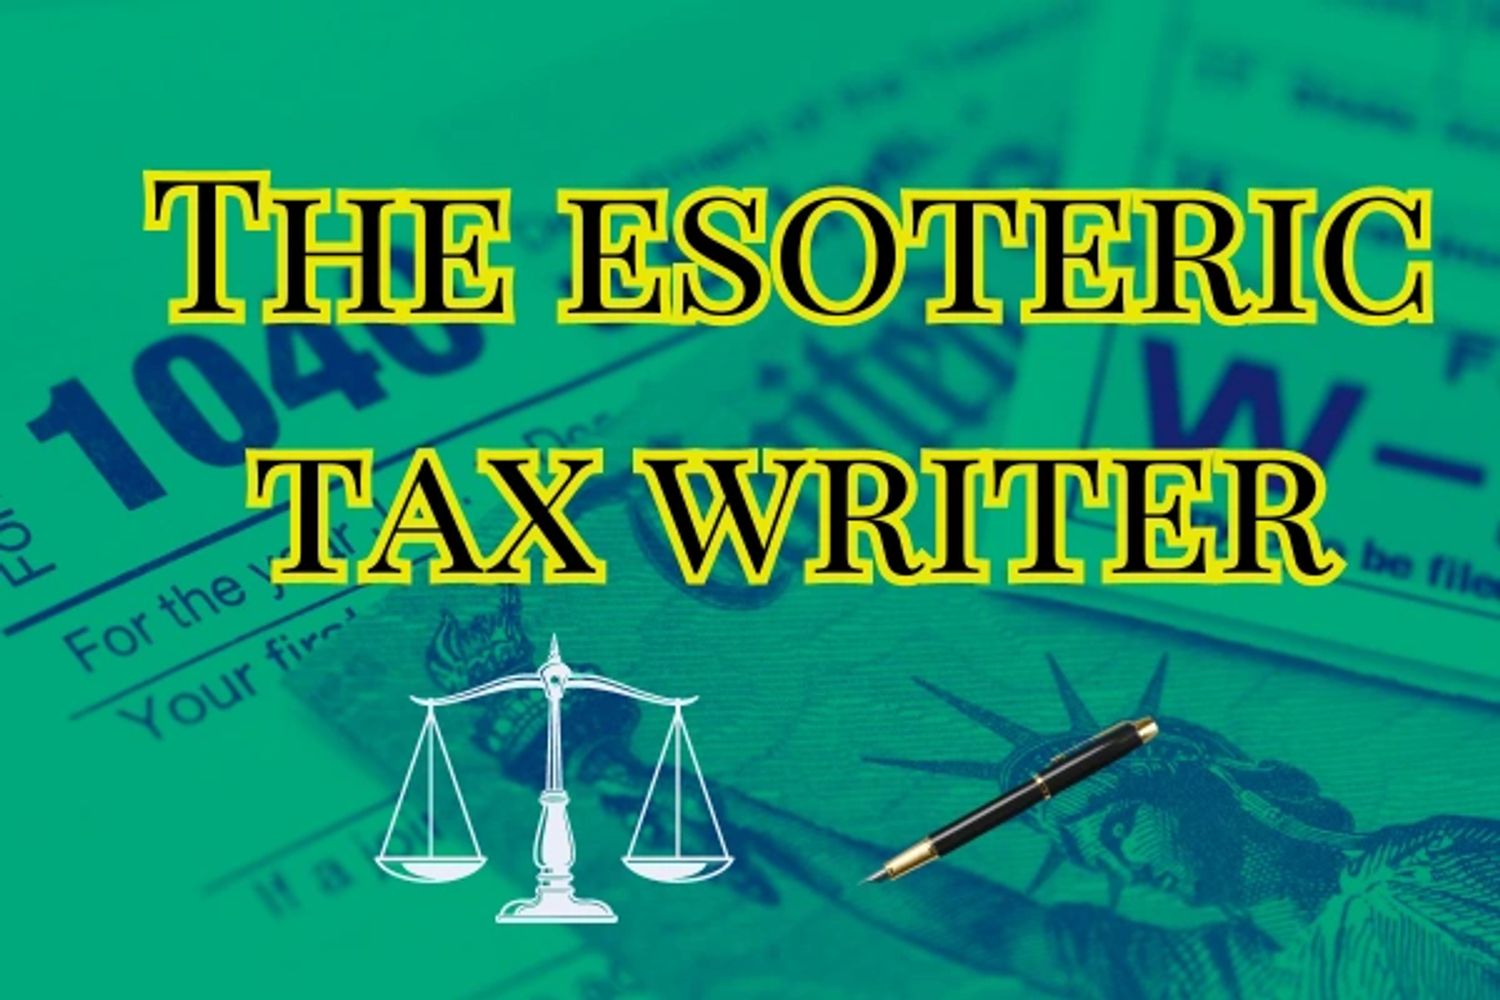 The Esoteric Tax Writer in yellow and black text over a stylized green background